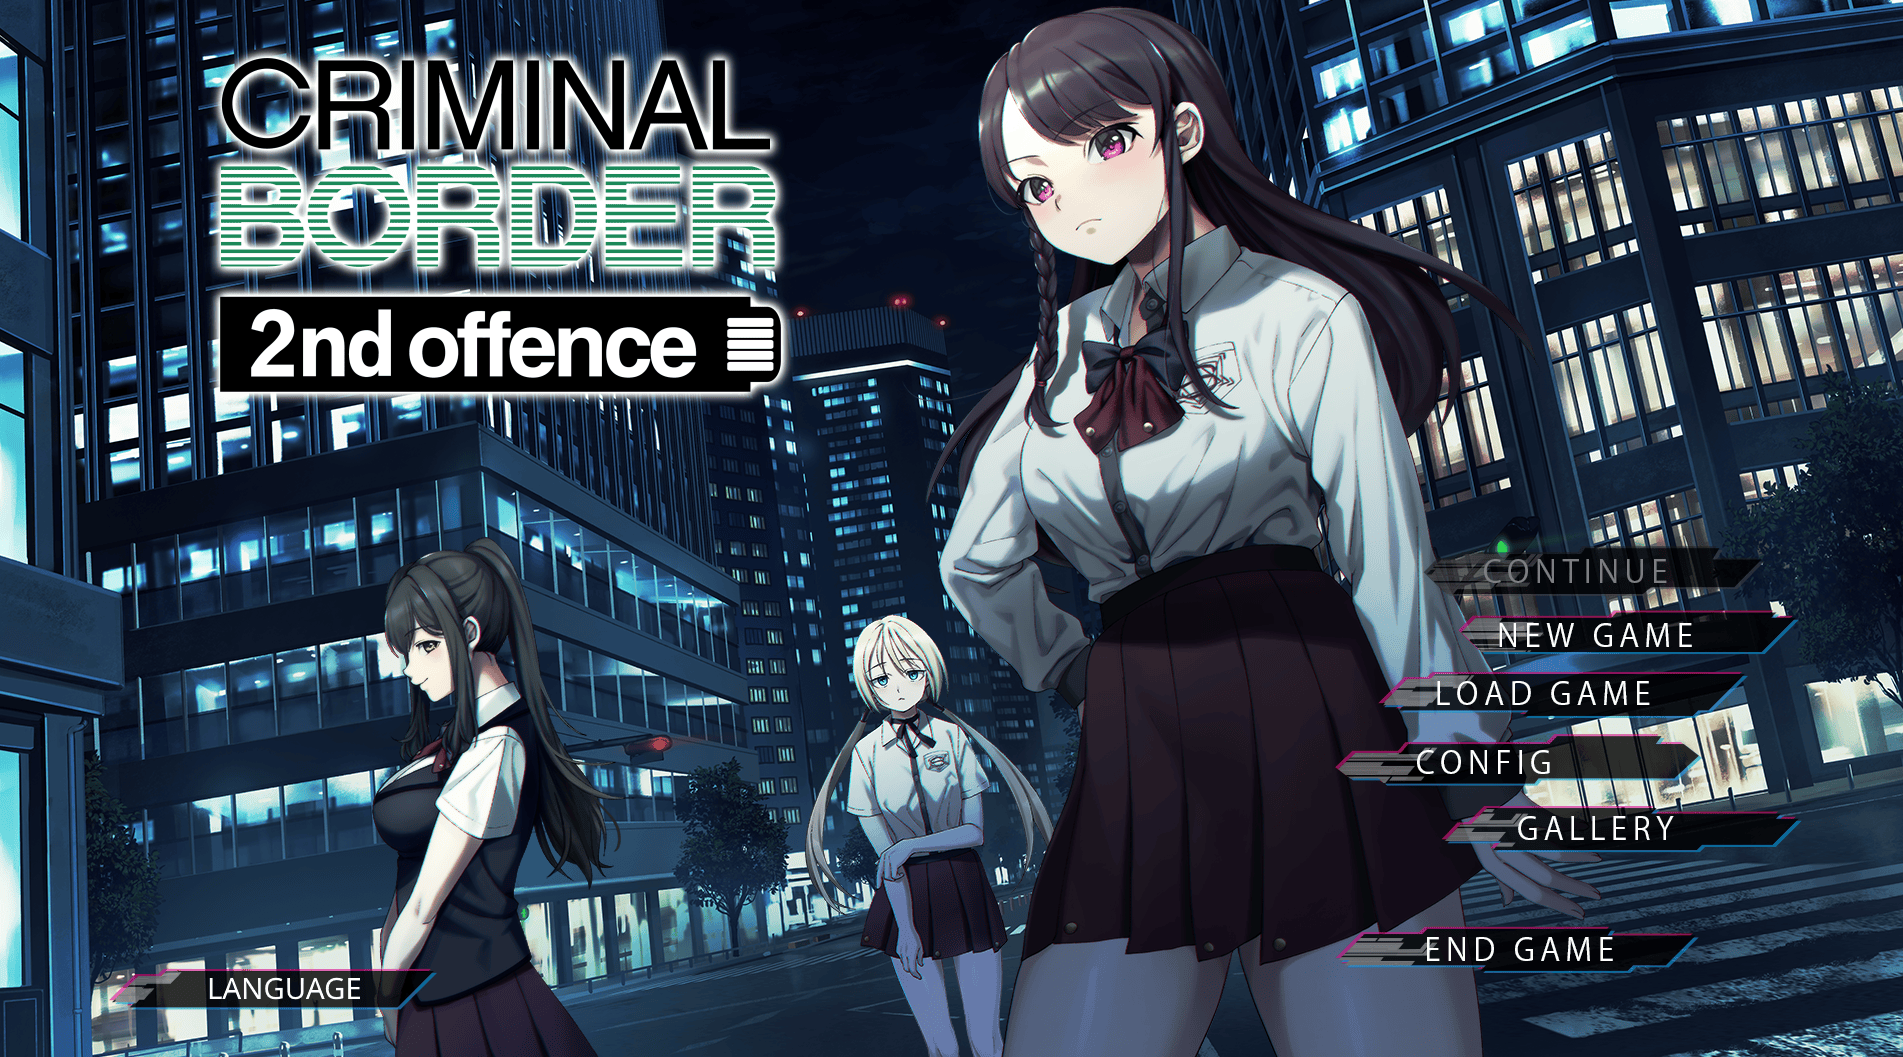 [ADV] 阈限边界 Part II/クリミナルボーダー 2nd offence 官中 [FM/XN/5.67G/百度]